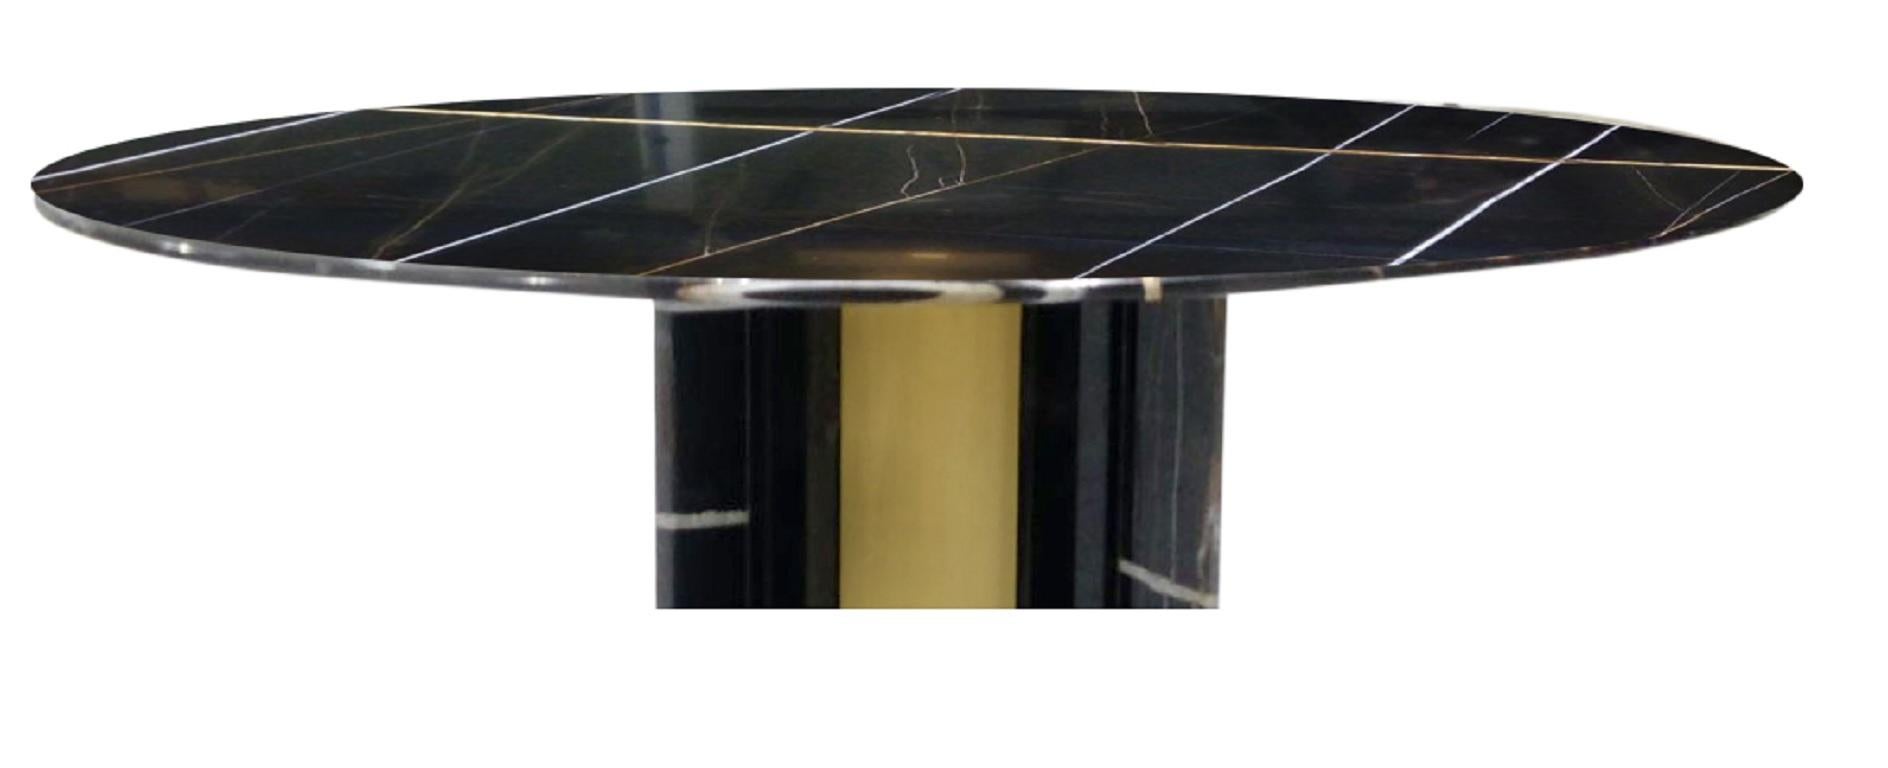 A stunning round Sahara Noir marble-top rests upon a tri-point polished brass base creating a simple yet pronounced and elegant dining table. Paris will add a stylish focal point to any dining area.

Top: Polished Sahara noir marble 
Base: Polished